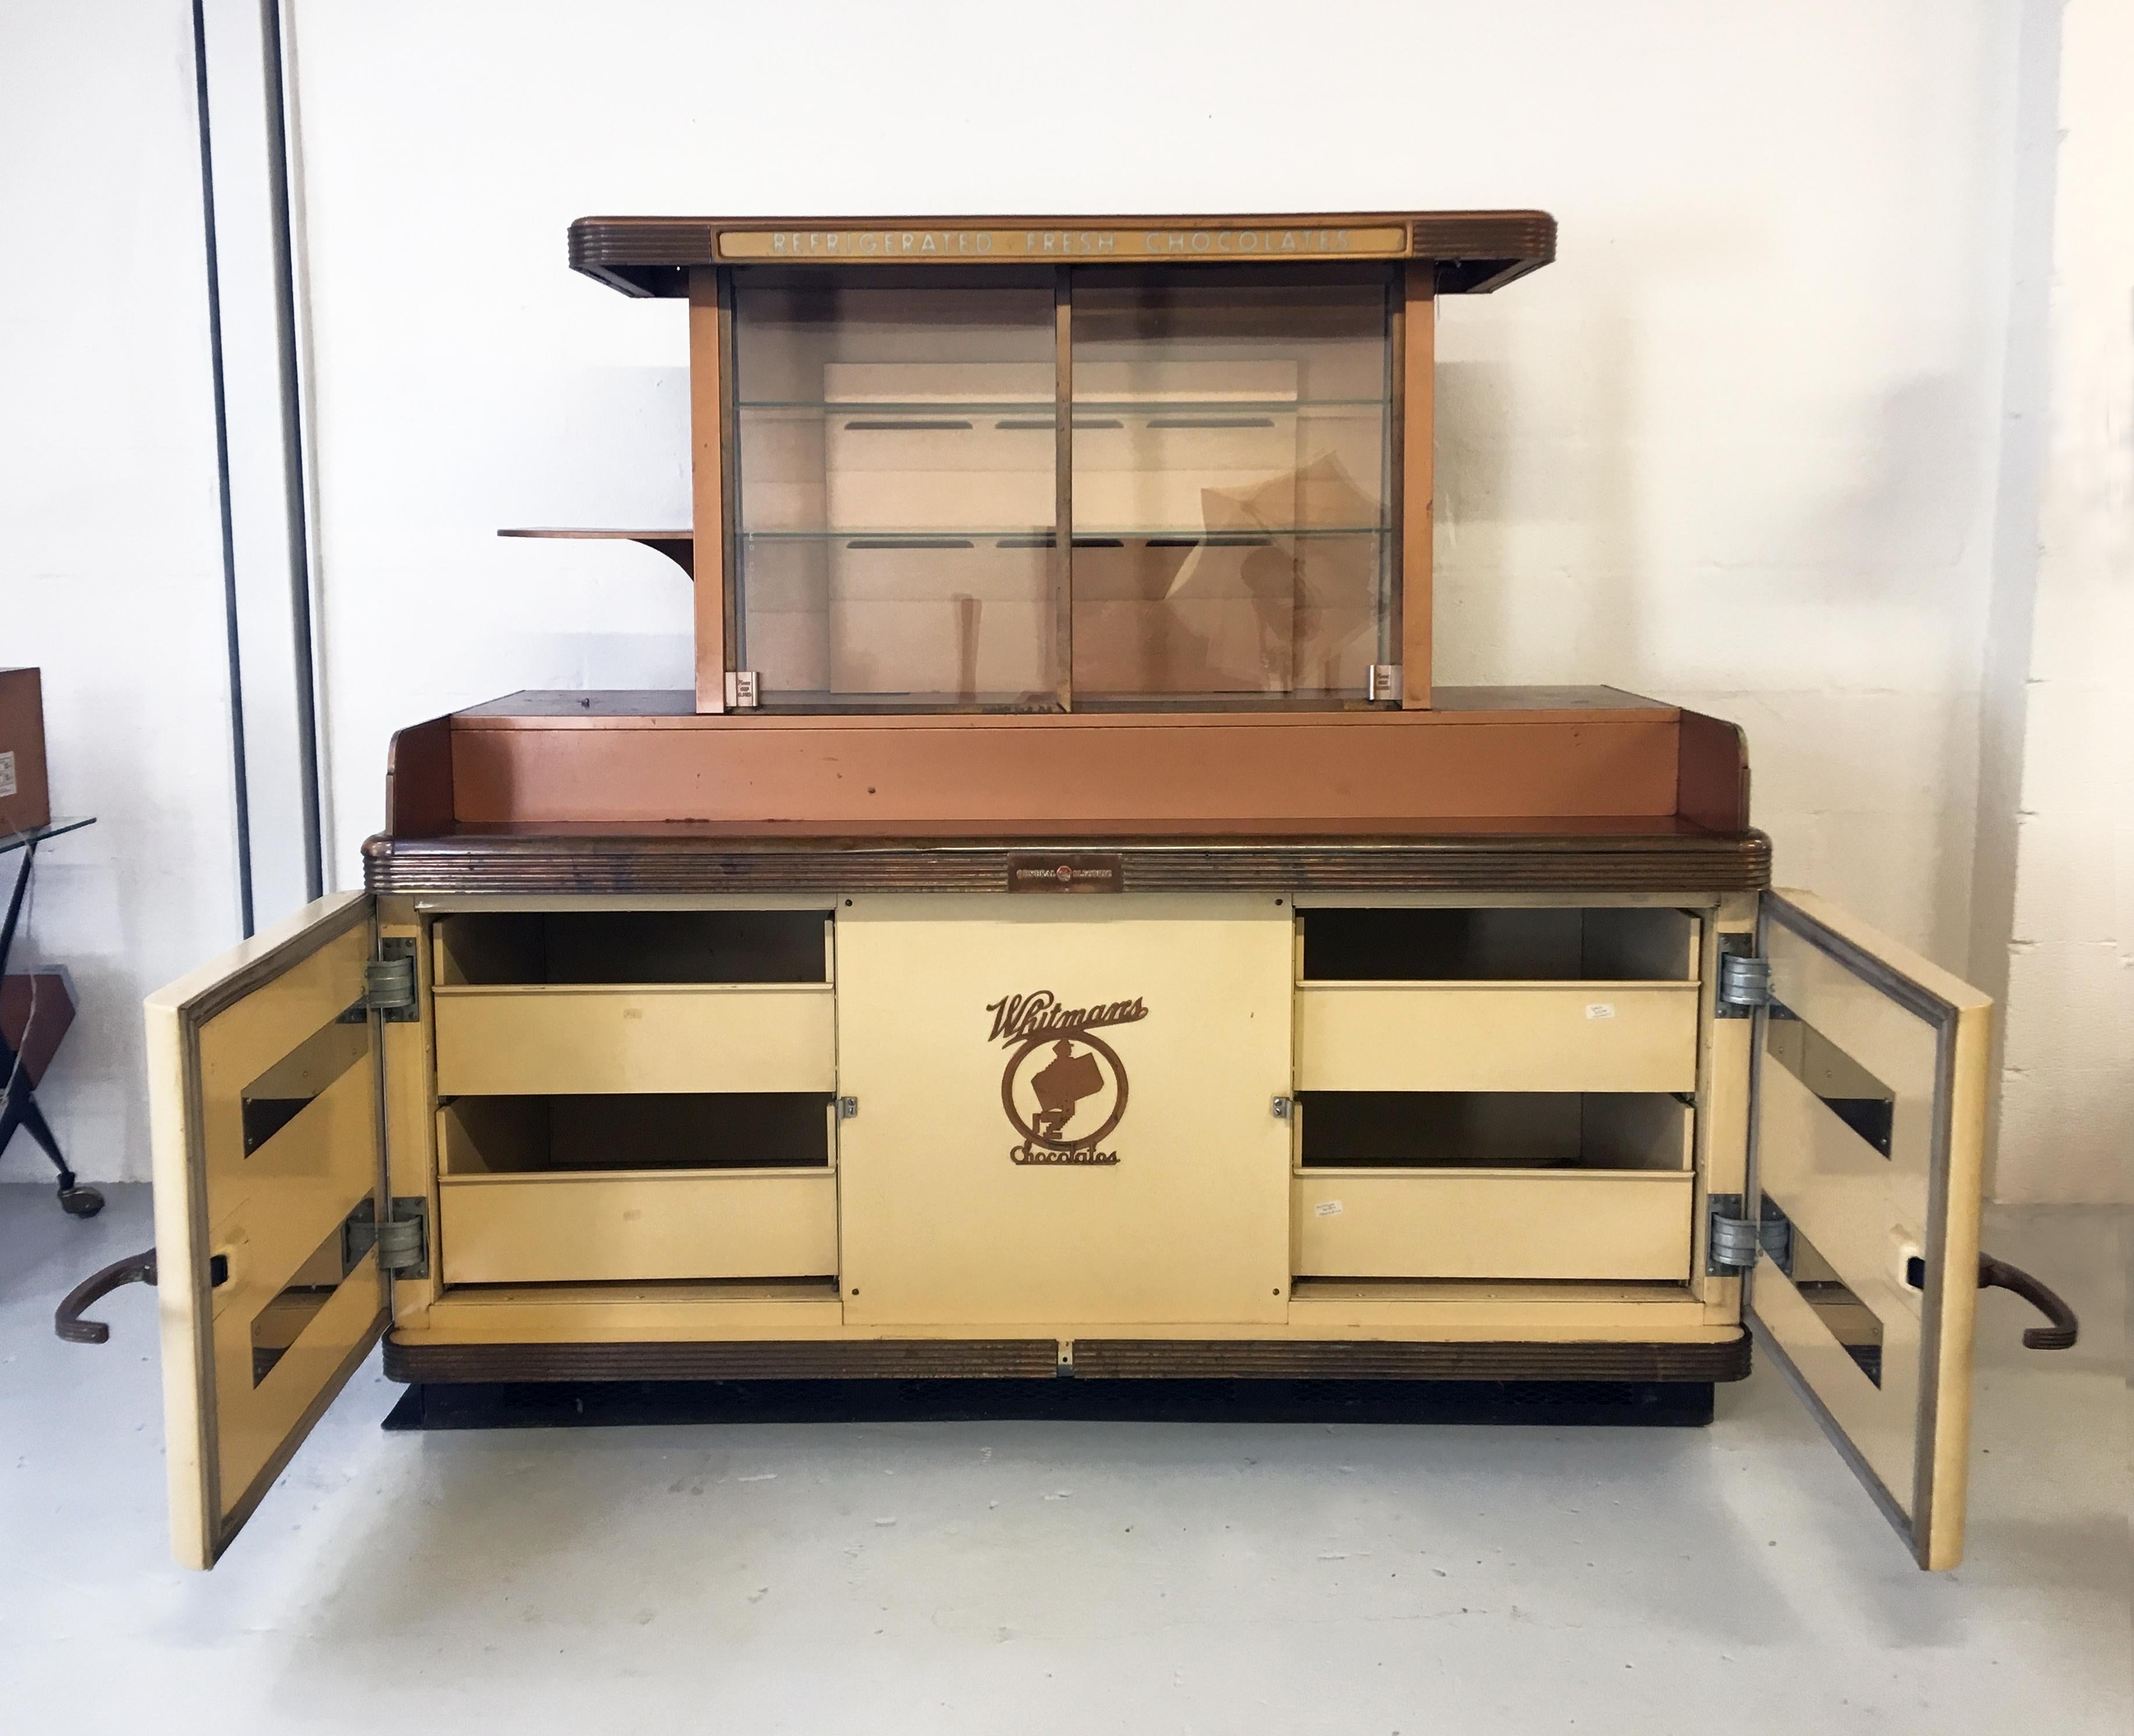 Originally from America, this rare vintage 1947 Whitman’s Chocolate Refrigerated Display Counter has just come out of long time storage. 
The company Whitman's was founded in Philadelphia, Pennsylvania in 1842, making it the oldest continuously